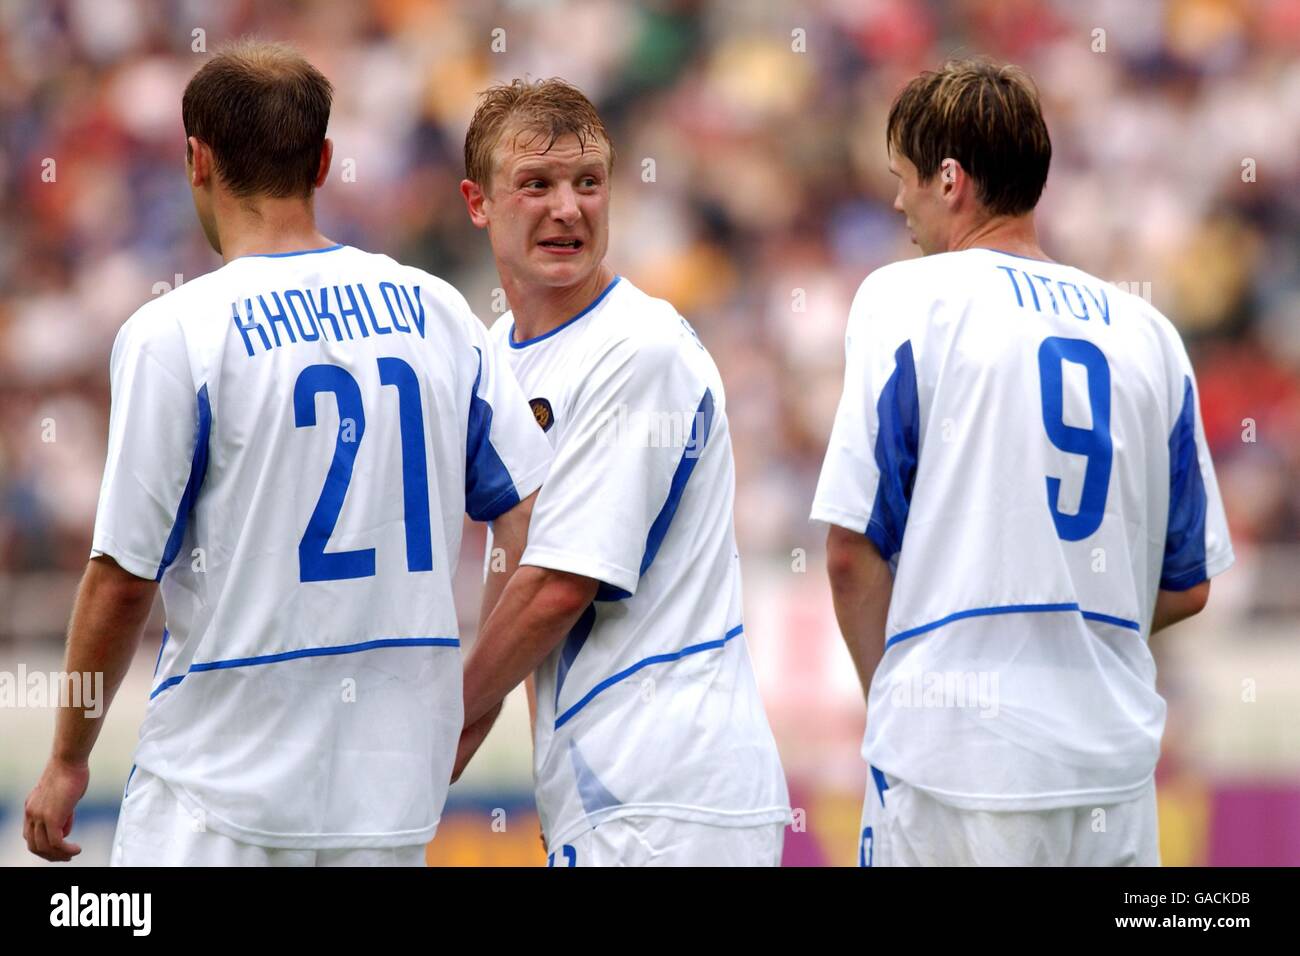 Soccer - FIFA World Cup 2002 - Group H - Belgium v Russia. L-R: Russia's Dmitry Khokhlov, Vladimir Beschastnykh and Egor Titov form a defensive wall Stock Photo